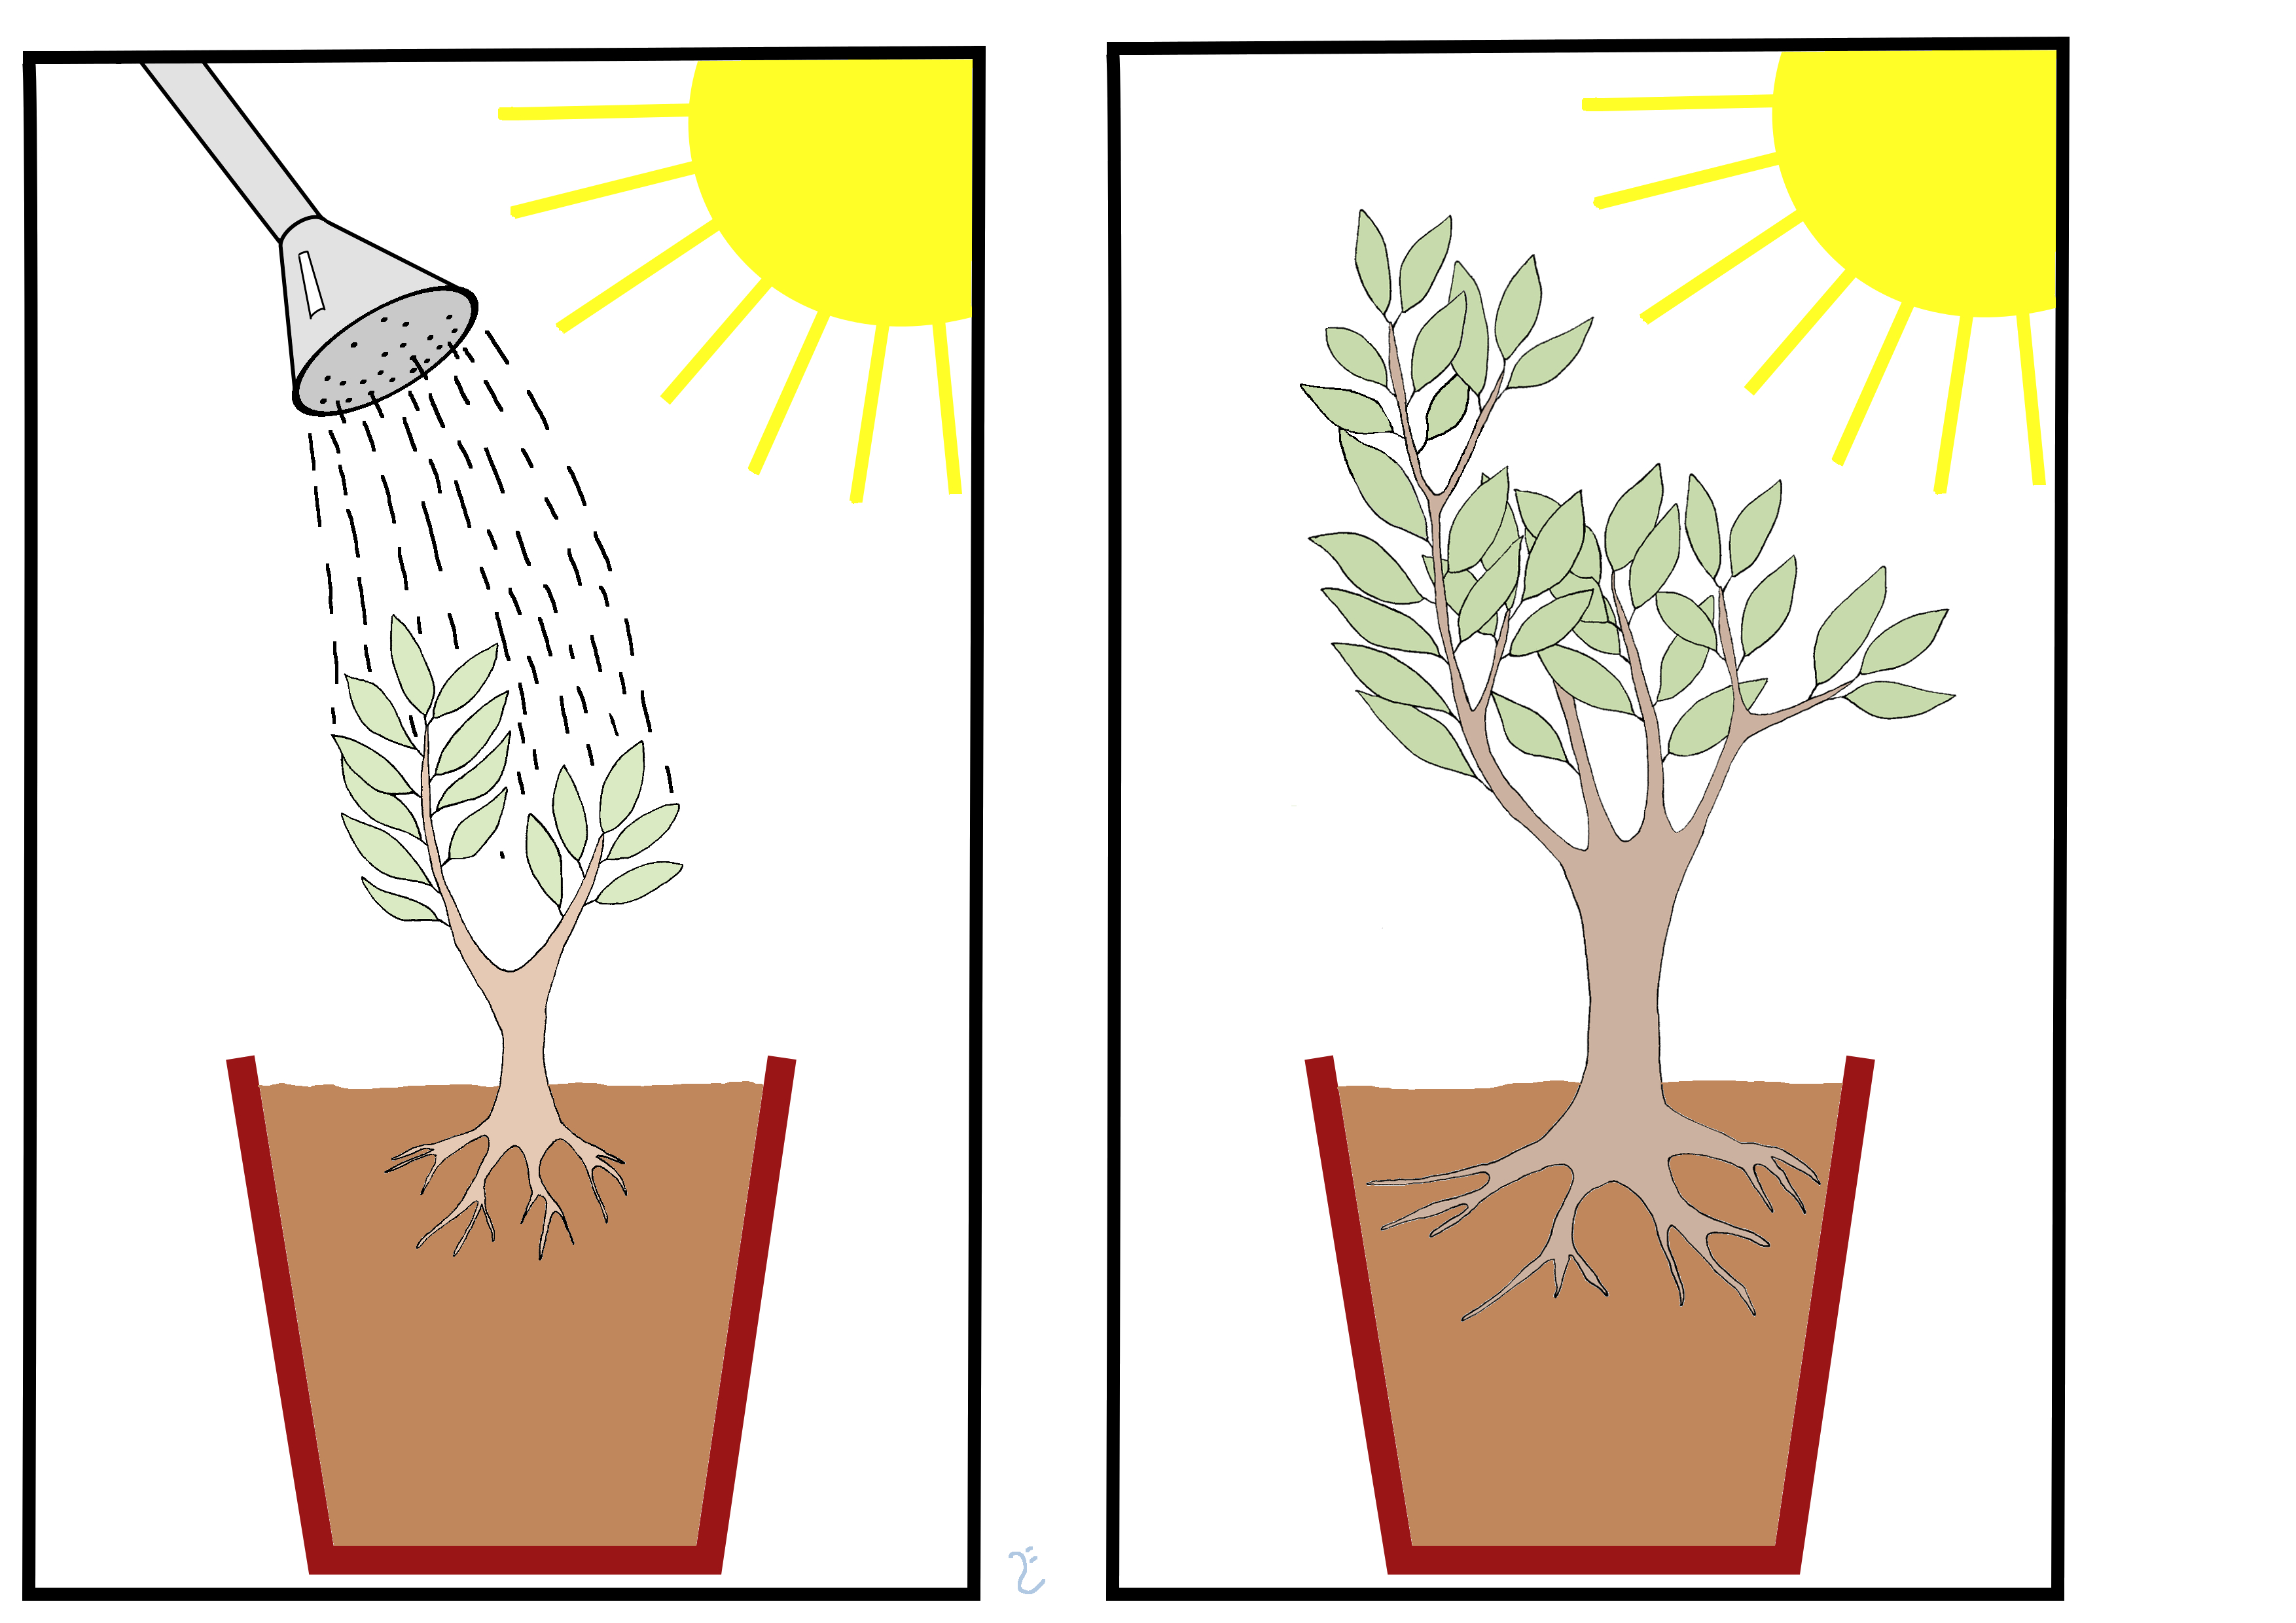 Illustration of the willow tree experiment. By Lars Ebbersmeyer.